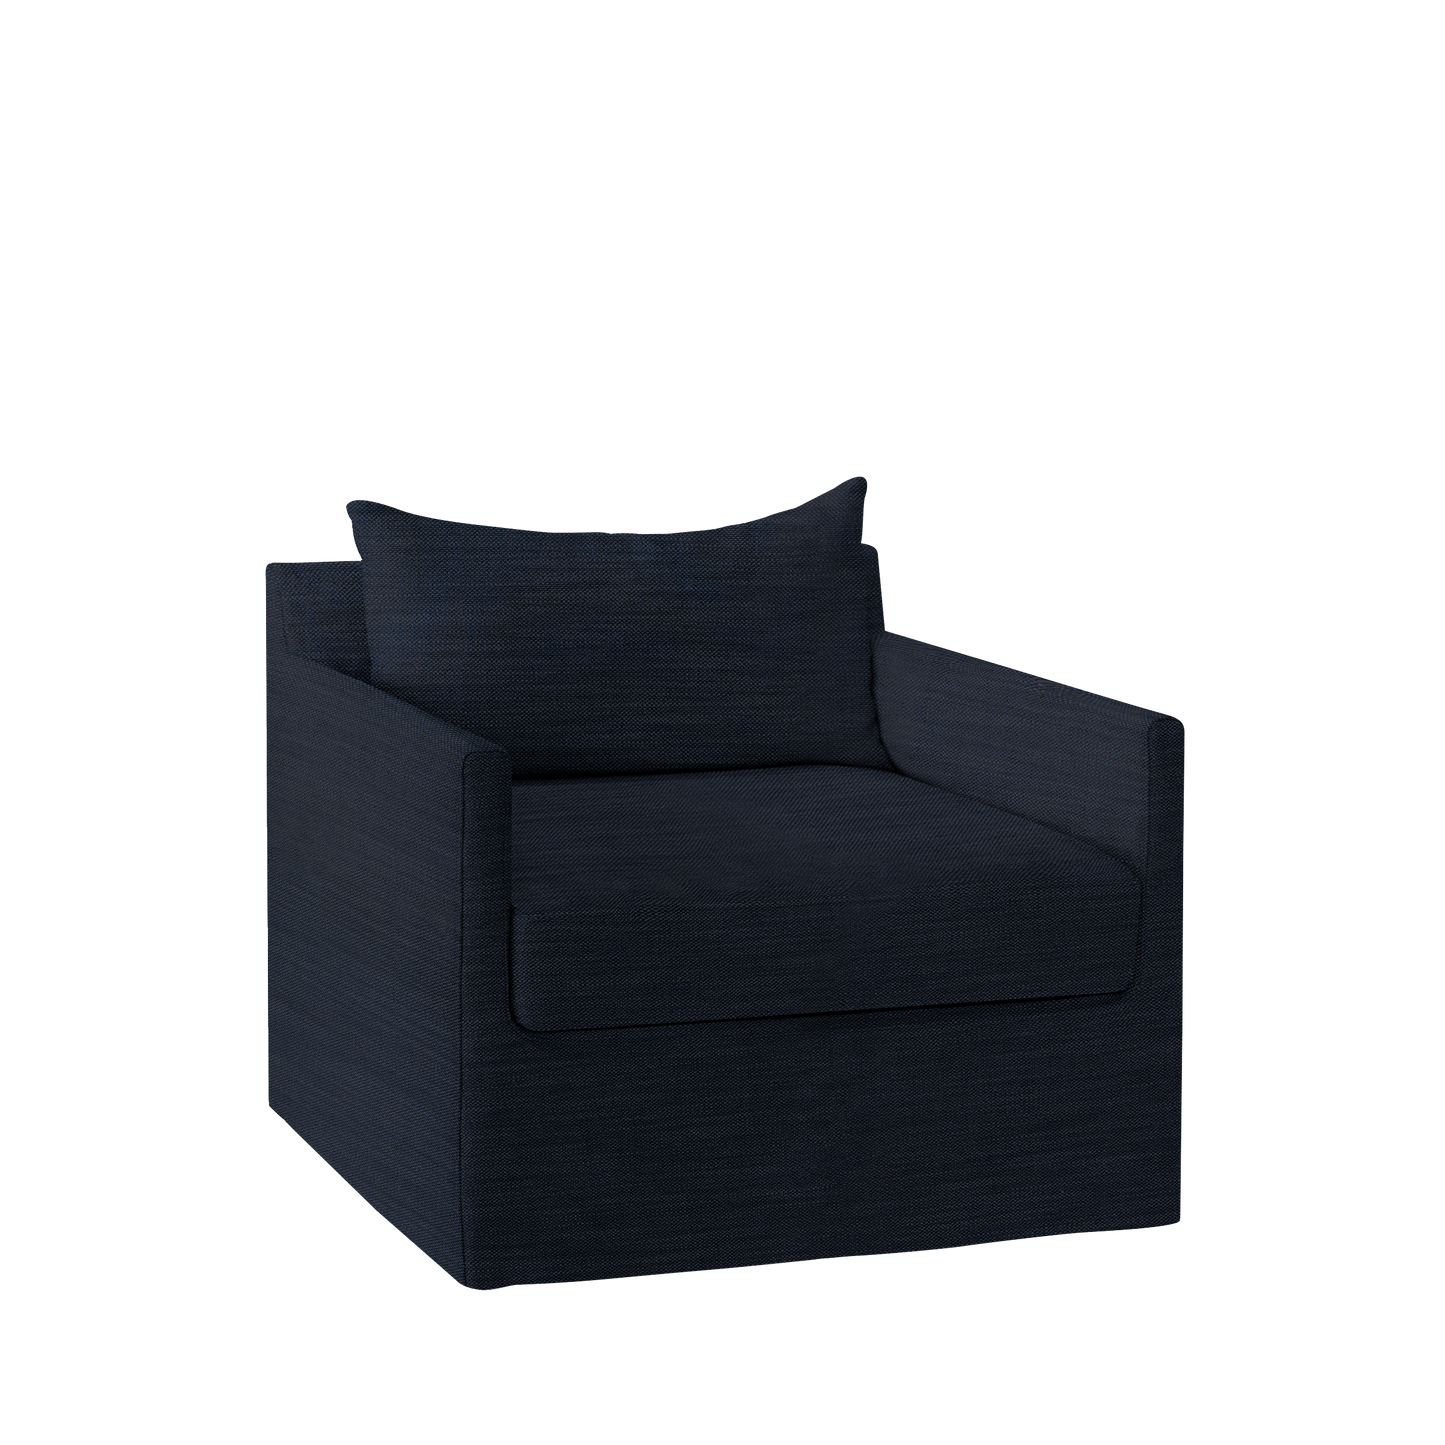 Extra wide Alba lounge chair with Rocco dark blue textile